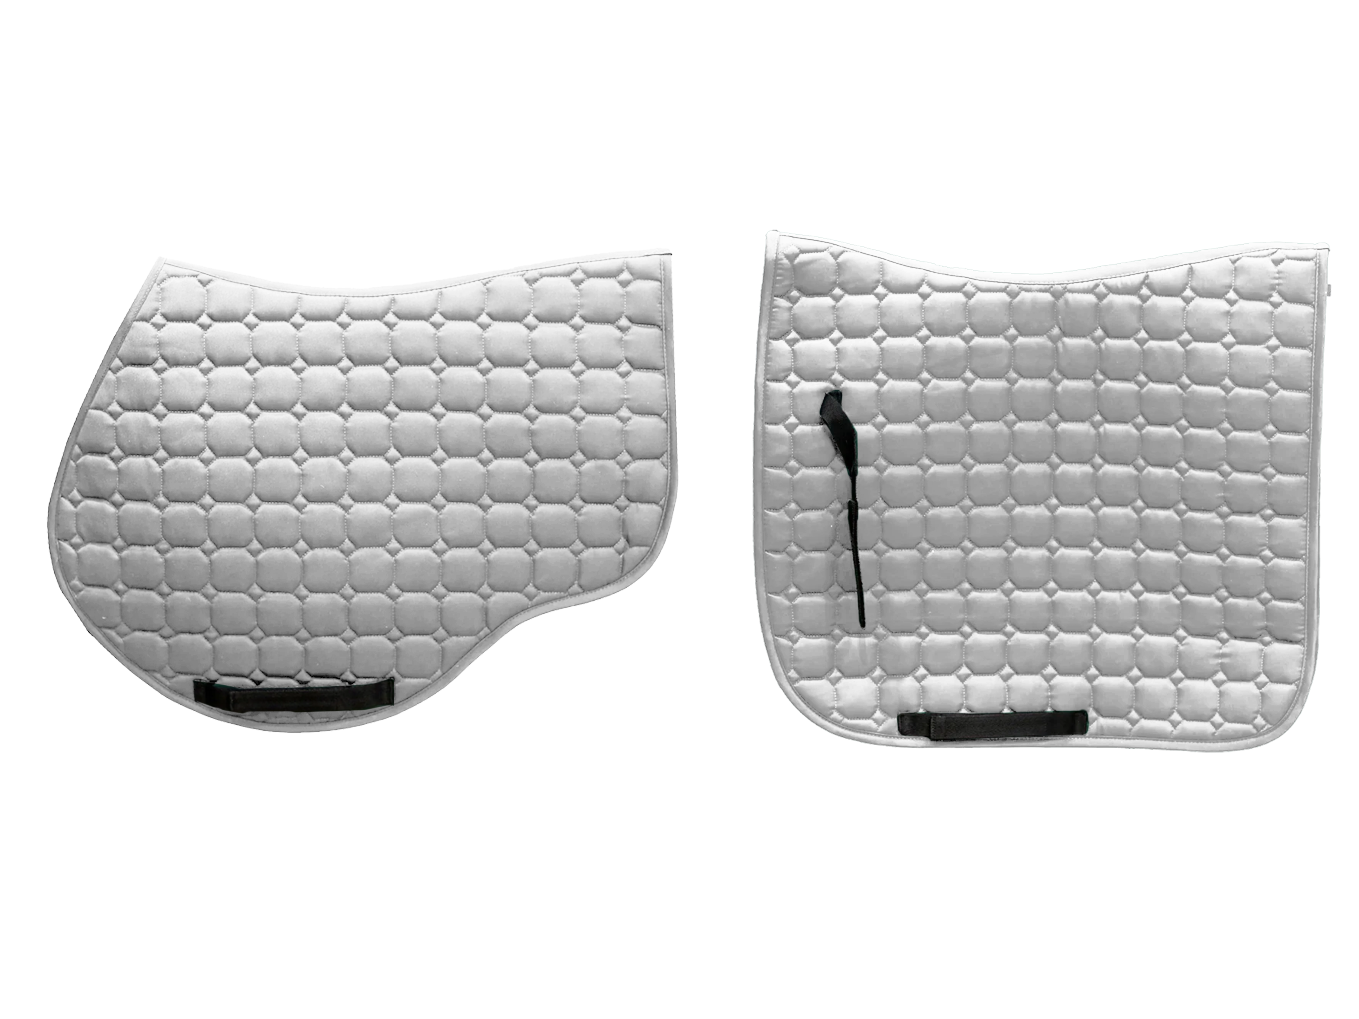 Quilted Saddle Pad - Light Grey/Silver - Design your own!